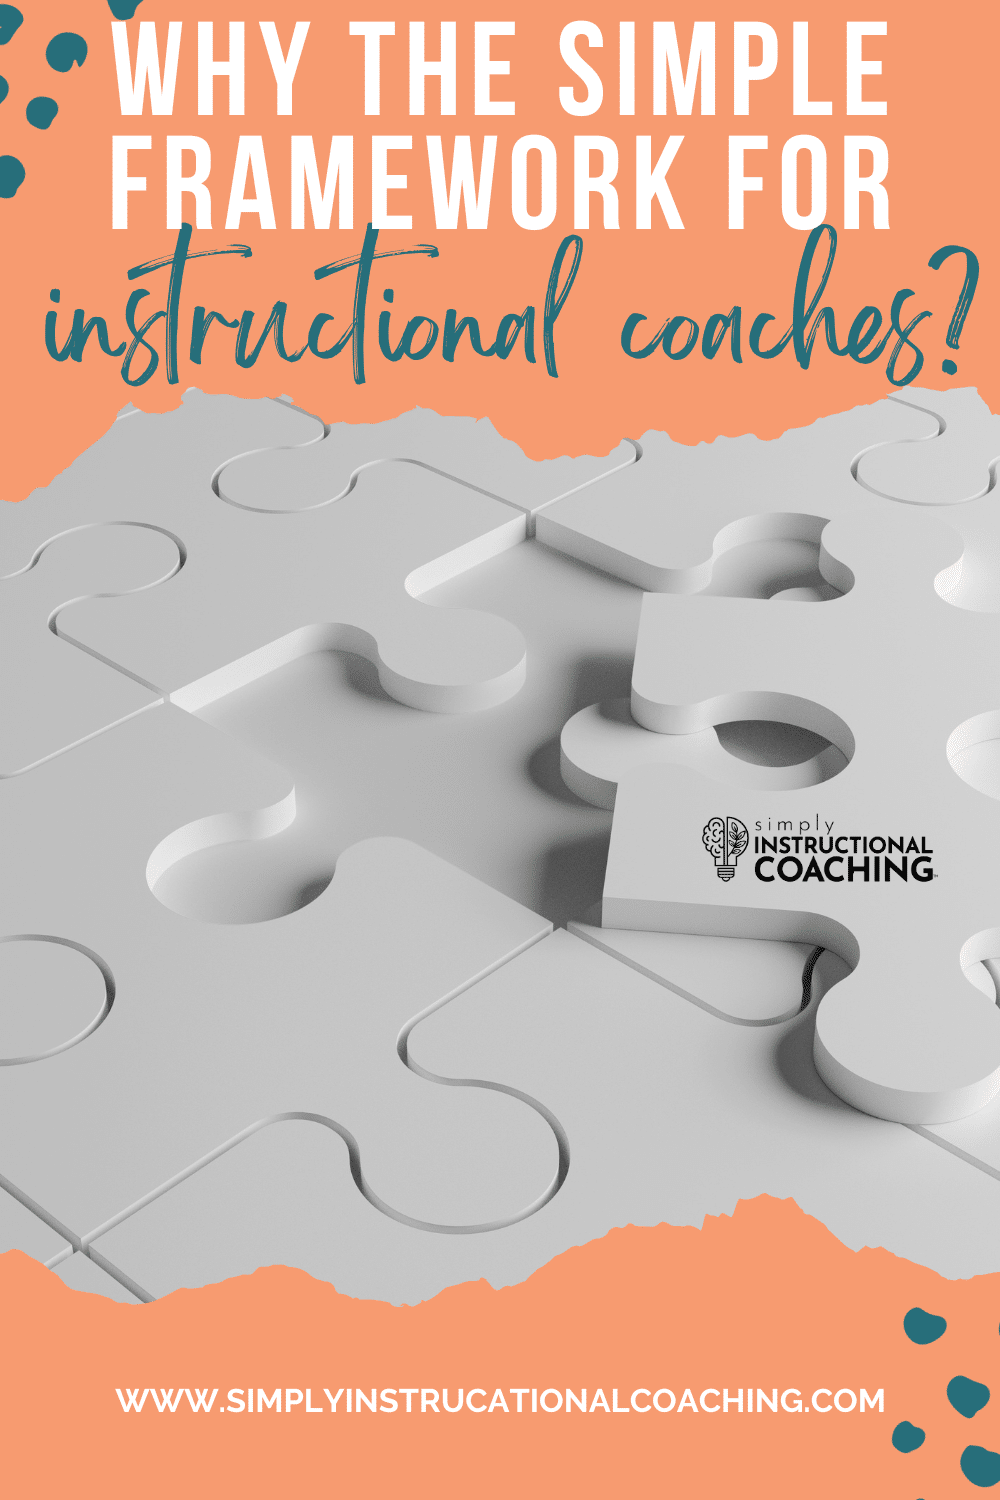 Why the SIMPLE framework for instructional coaches with puzzle pieces